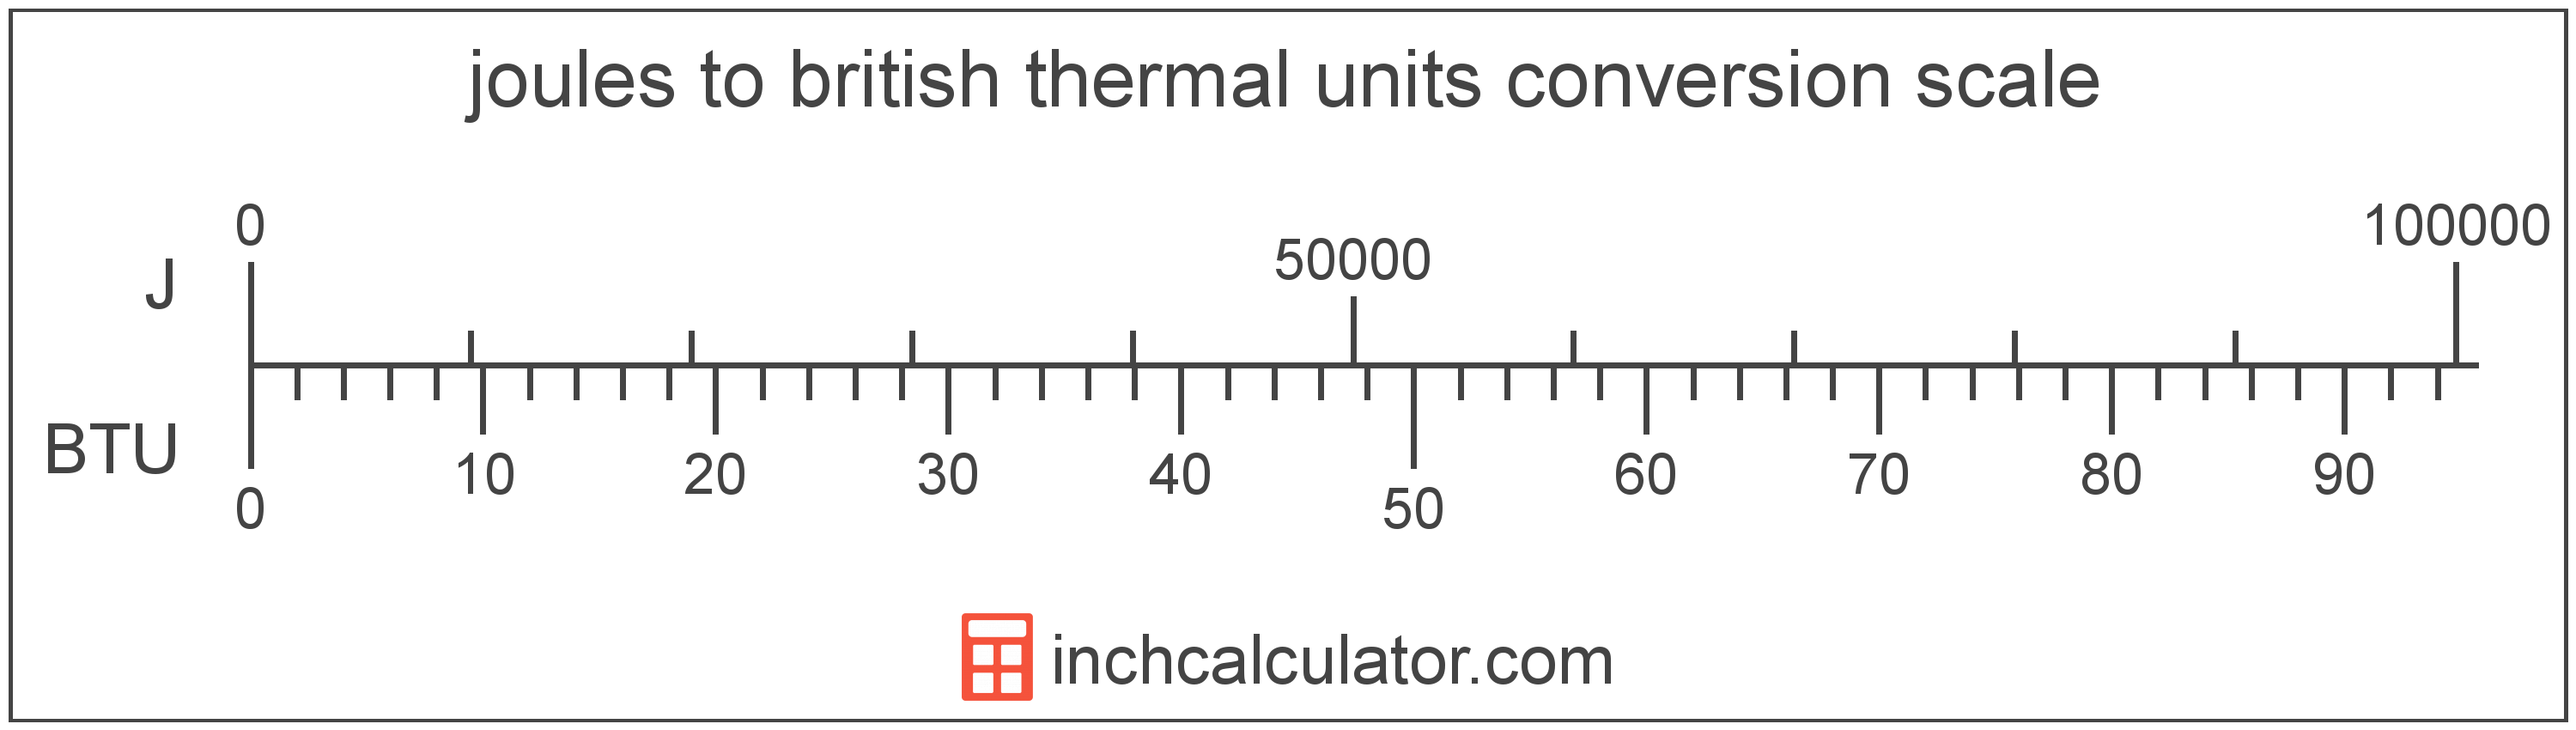 conversion scale showing joules and equivalent british thermal units energy values